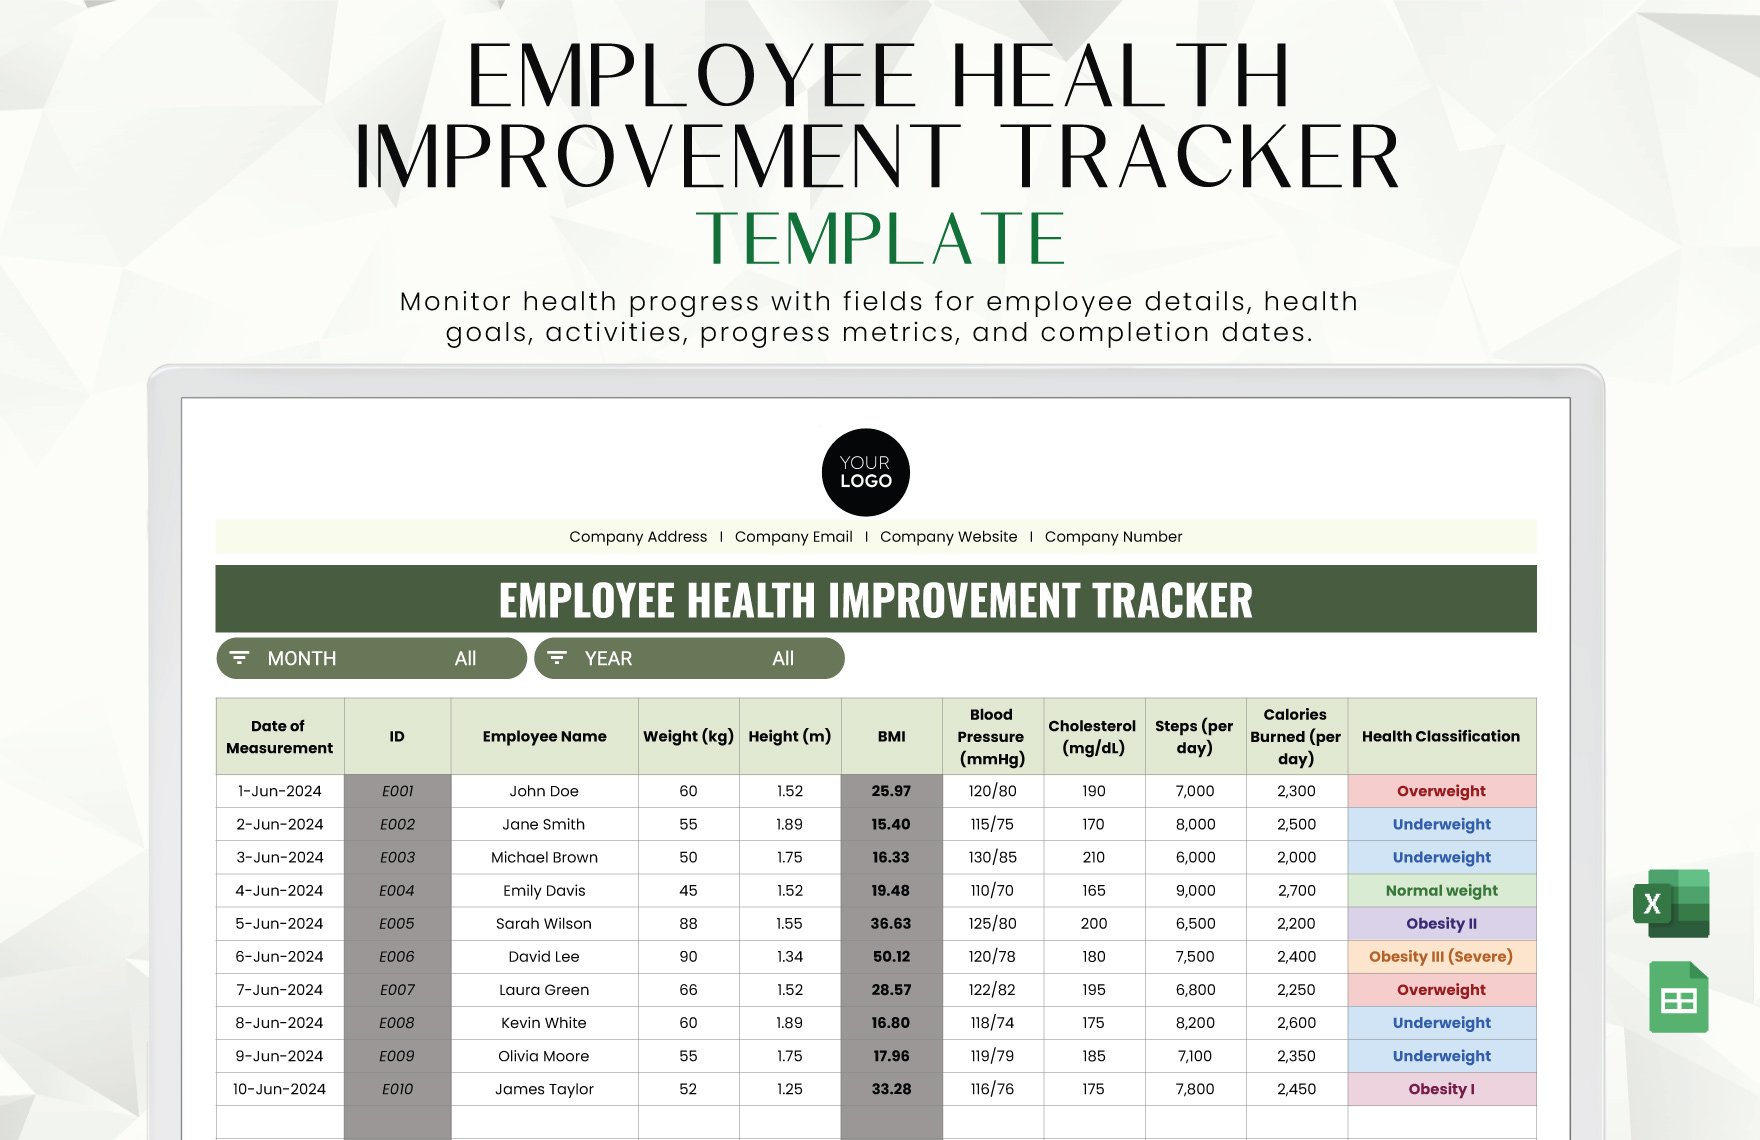 Employee Health Improvement Tracker Template in Excel, Google Sheets